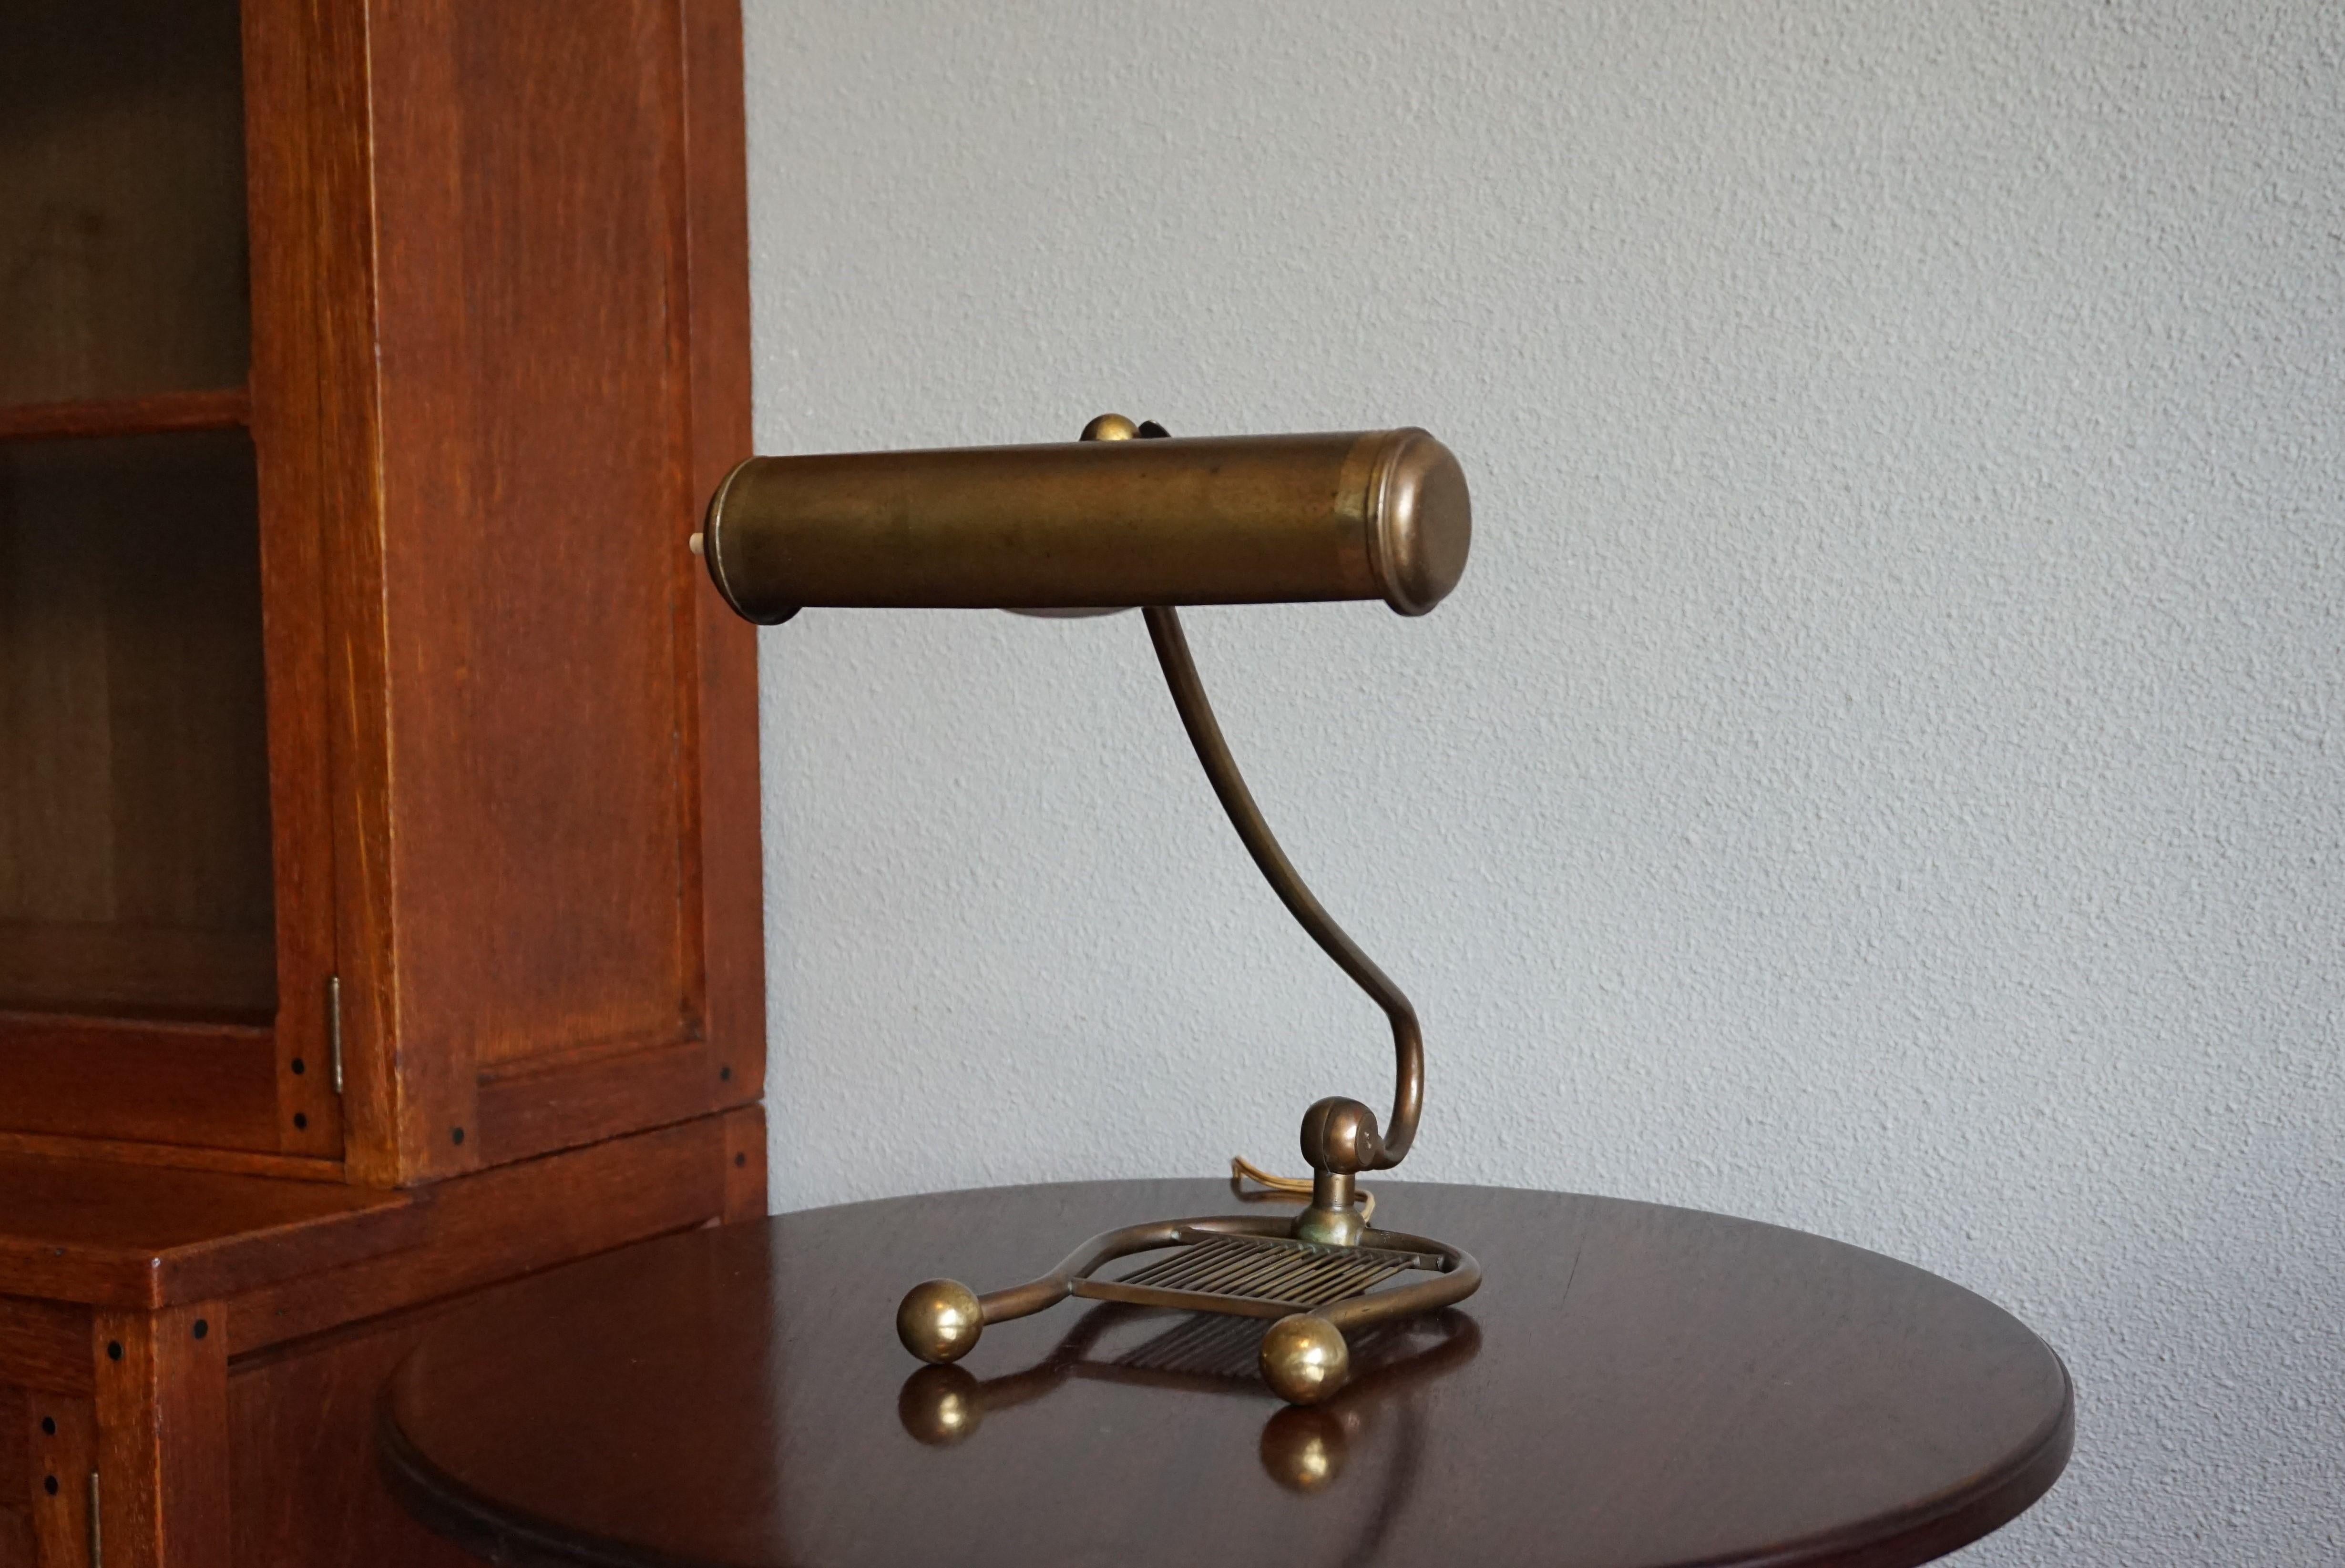 Stylish & Elegant Early to Mid-20th Century Harp Shaped Brass Piano or Desk Lamp 8